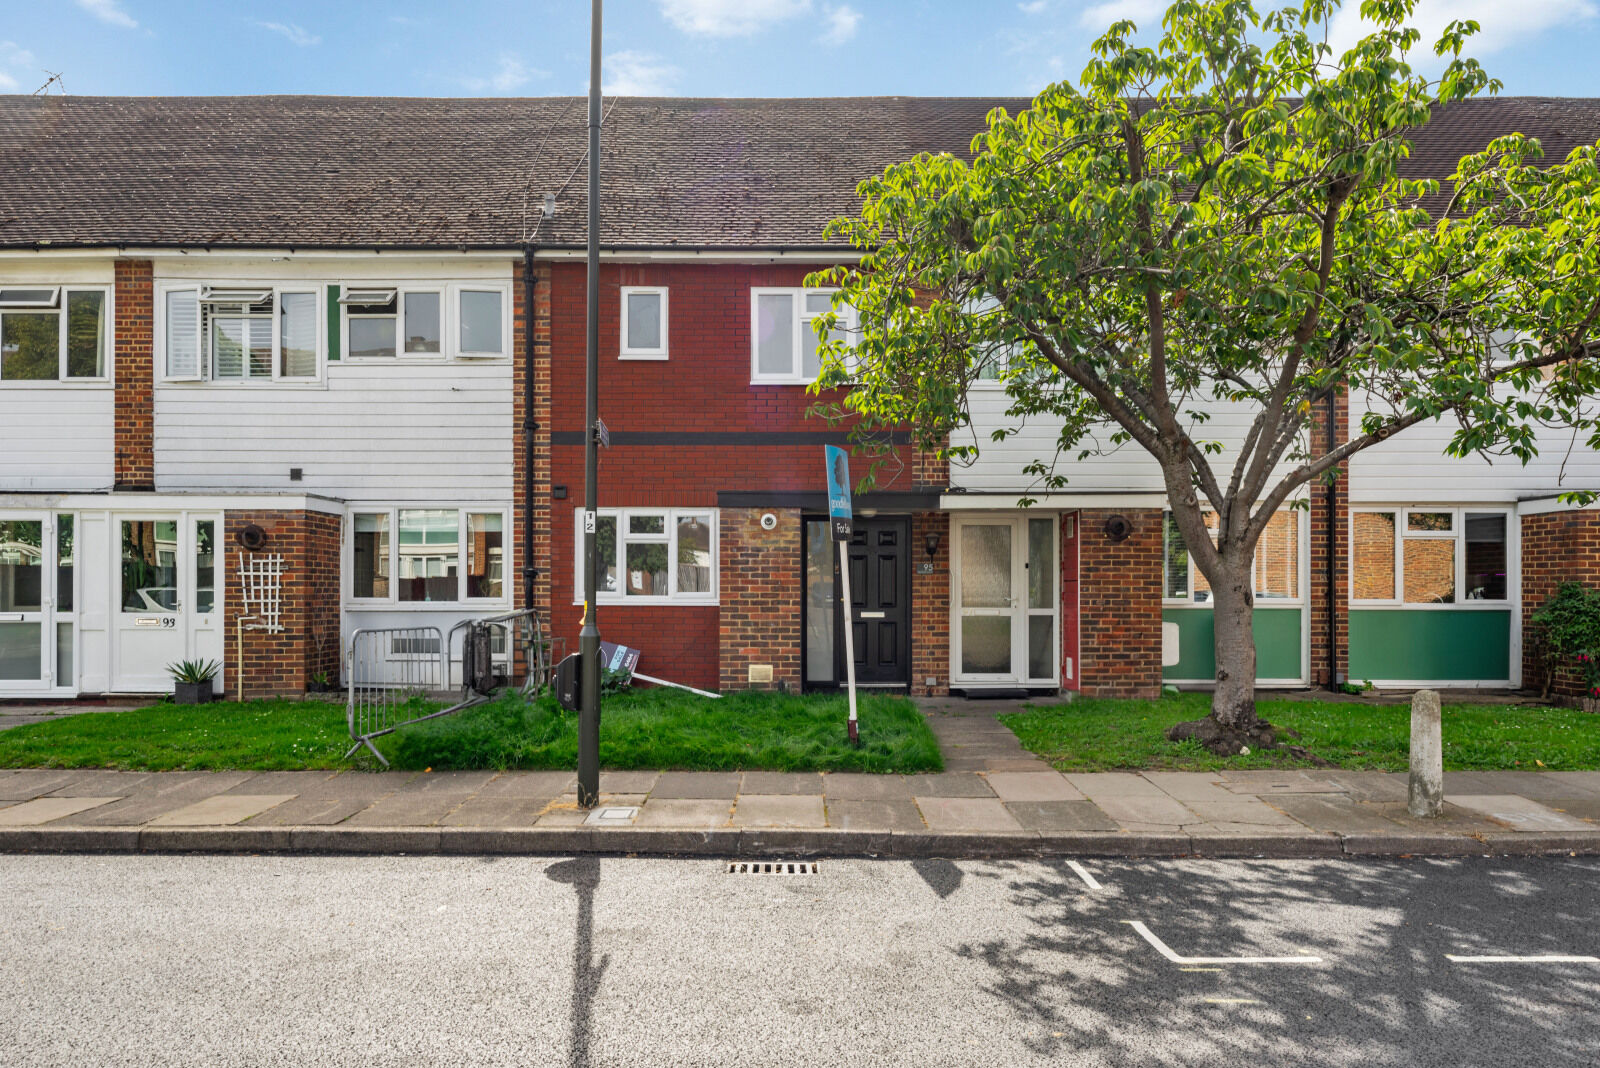 3 bedroom mid terraced house for sale Brookfields Avenue, Mitcham, CR4, main image